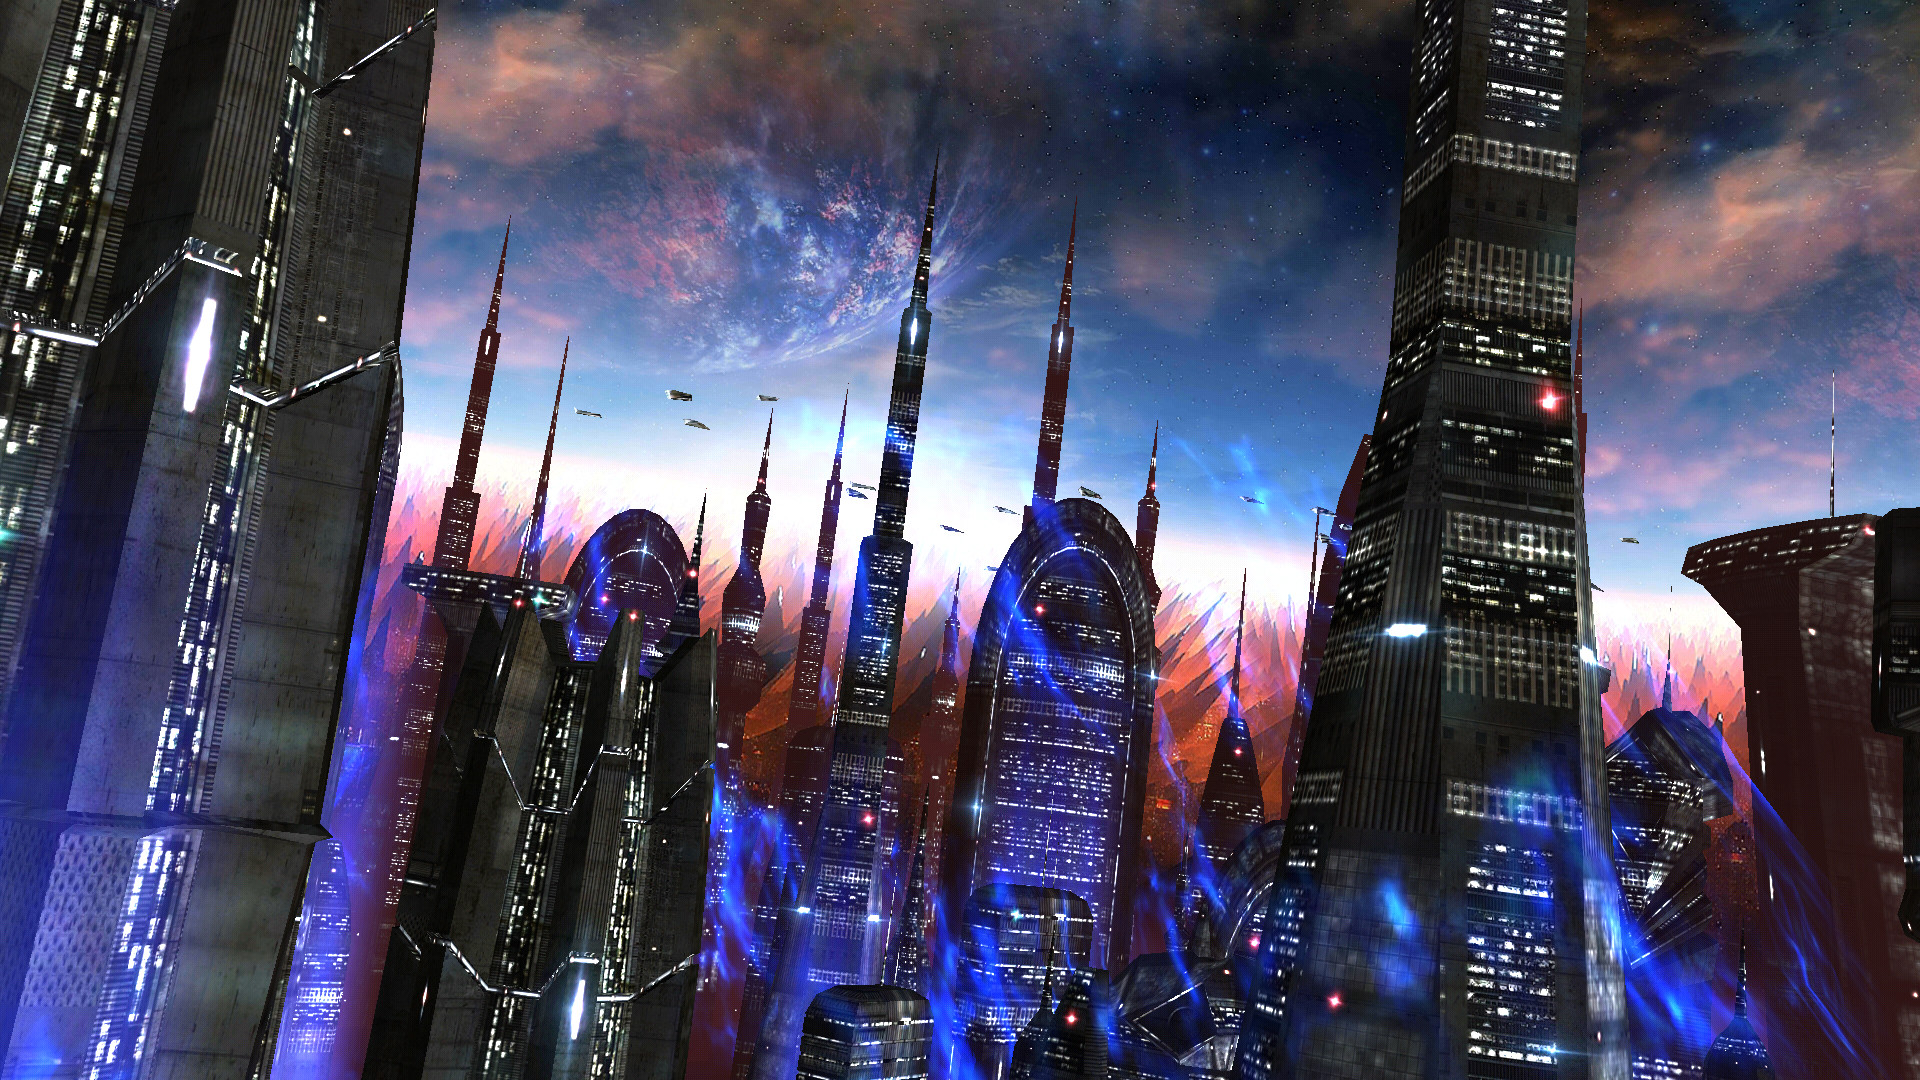 1920x1080 Space Colony turns your home screen into an alien cityscape with towering  buildings, epic star-filled skies, and glowing starships flying past.